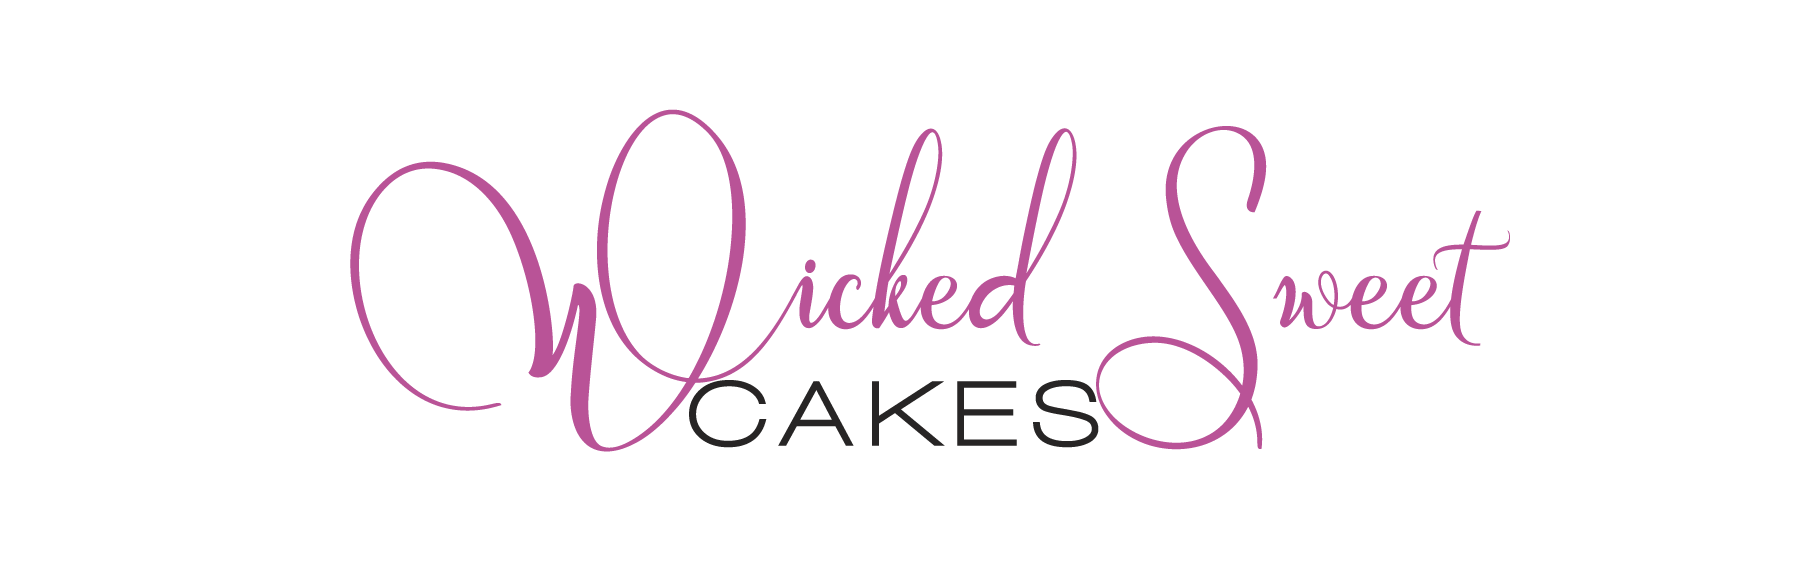 Gallery - WICKED SWEET CAKES